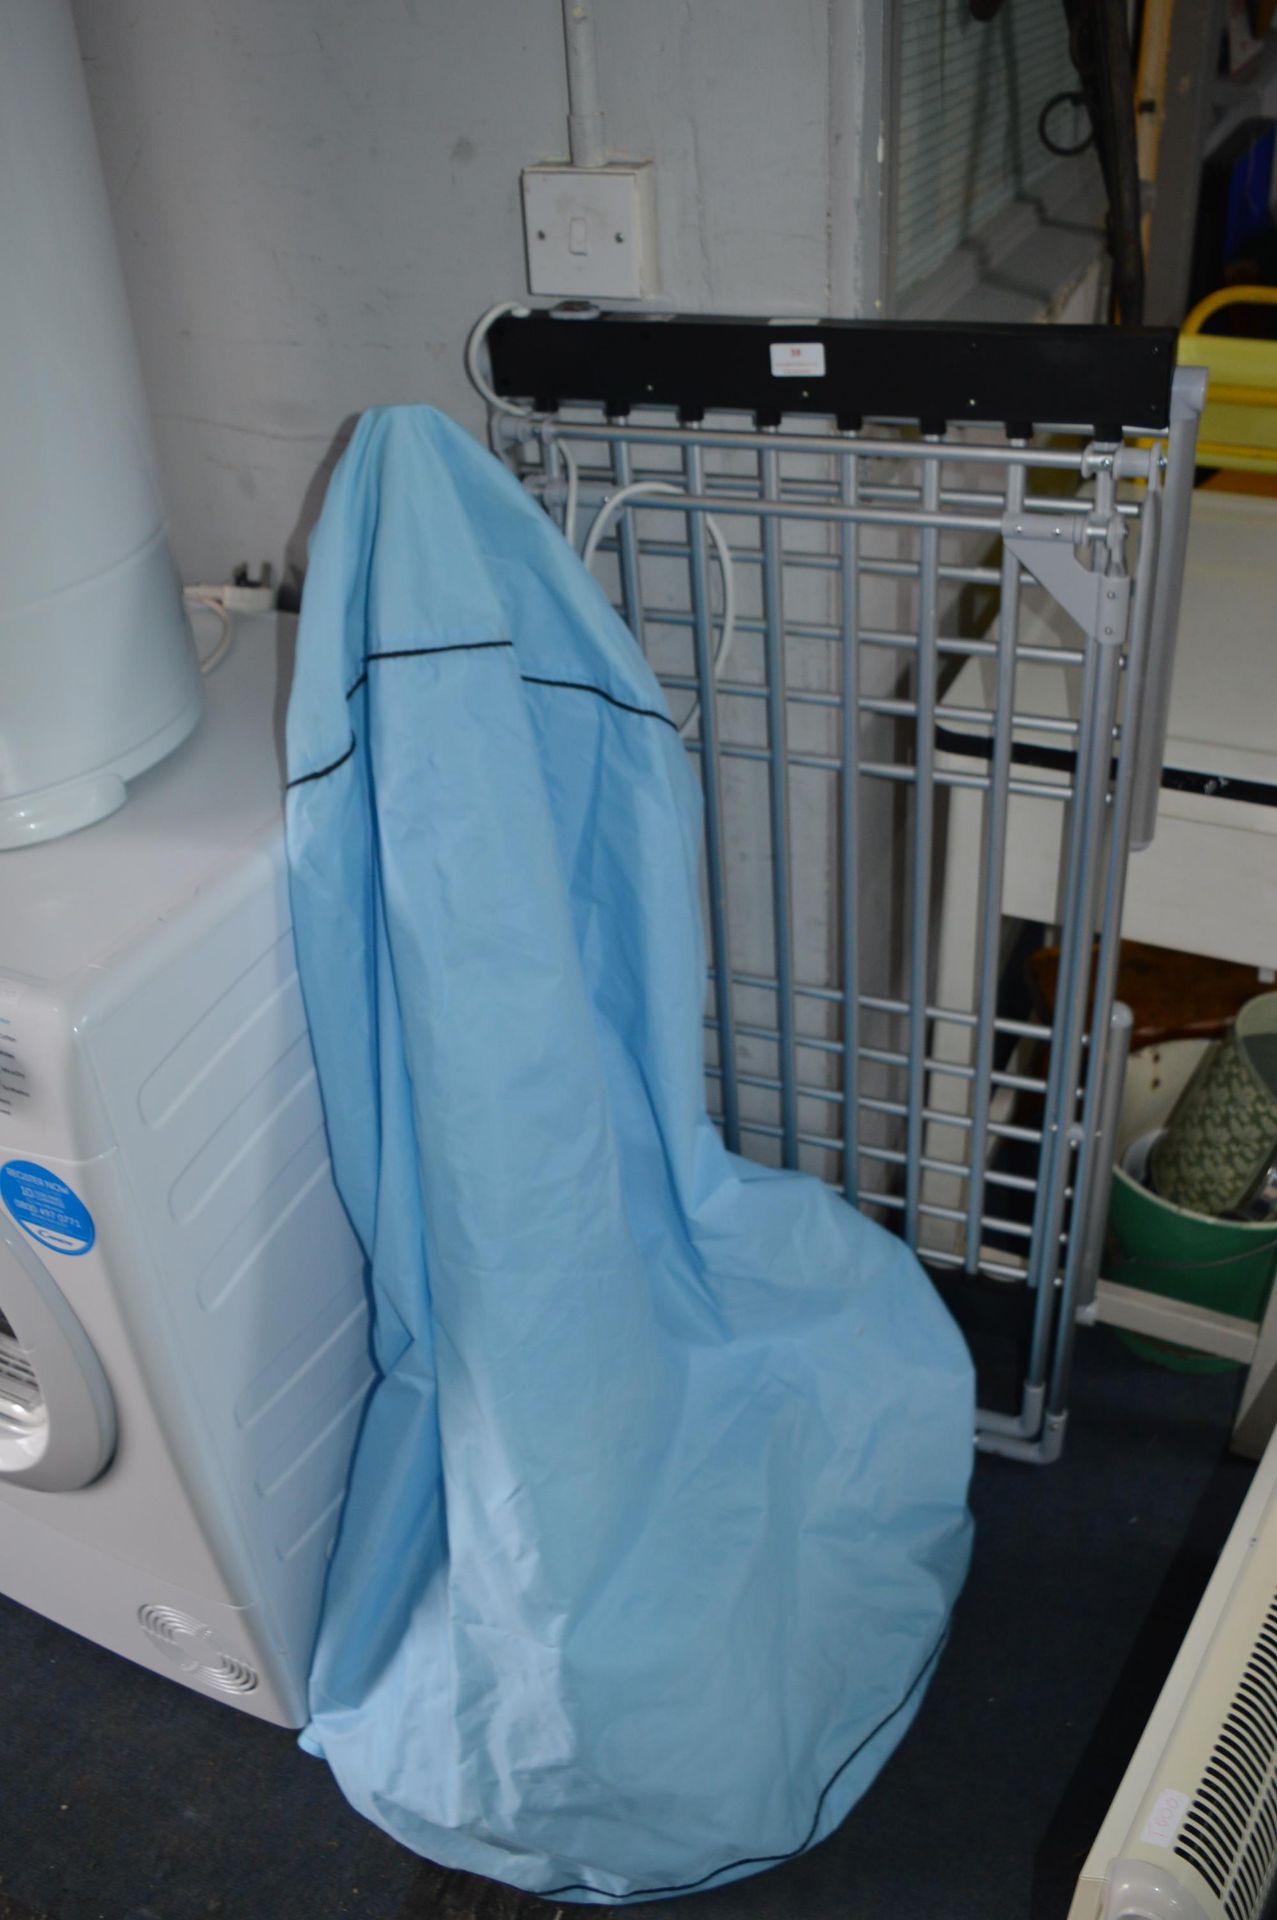 Electric Airer and an Electric Clothes Dryer